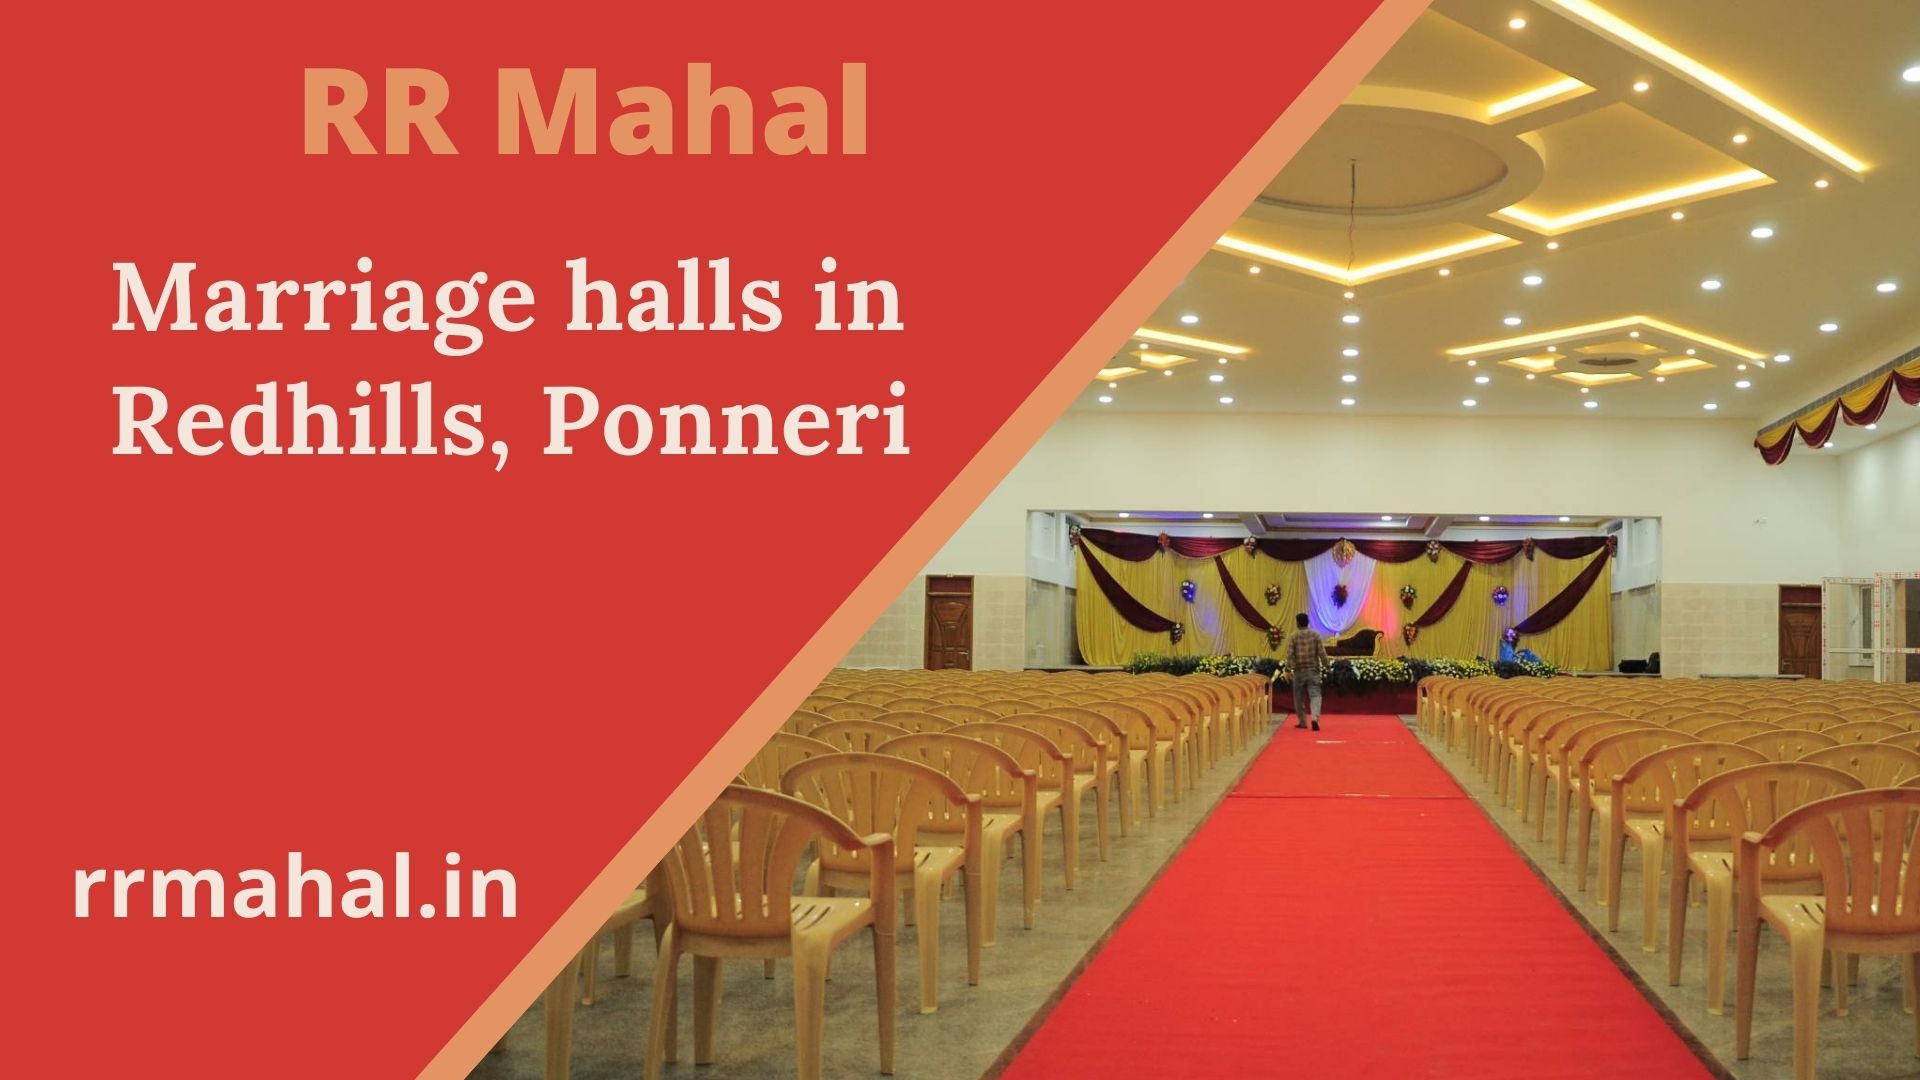 RR Mahal - Best Marriage Halls In Chennai